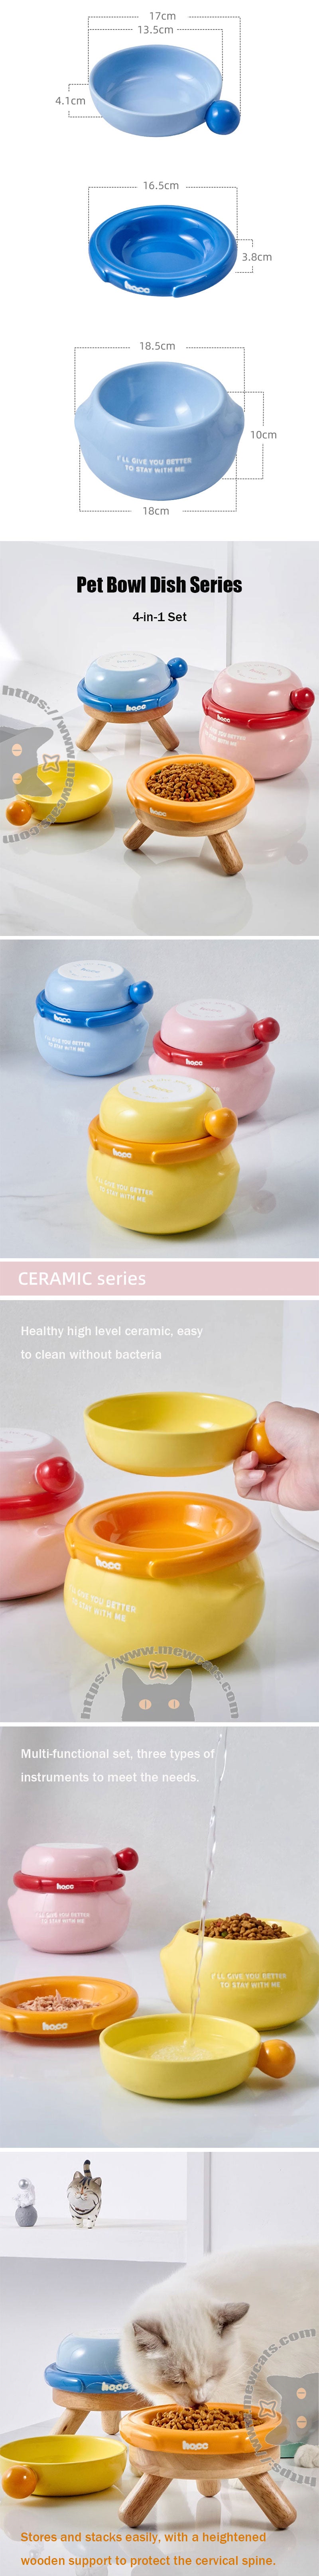 Ceramic Cat Food Water Bowl Dishes 4 in 1